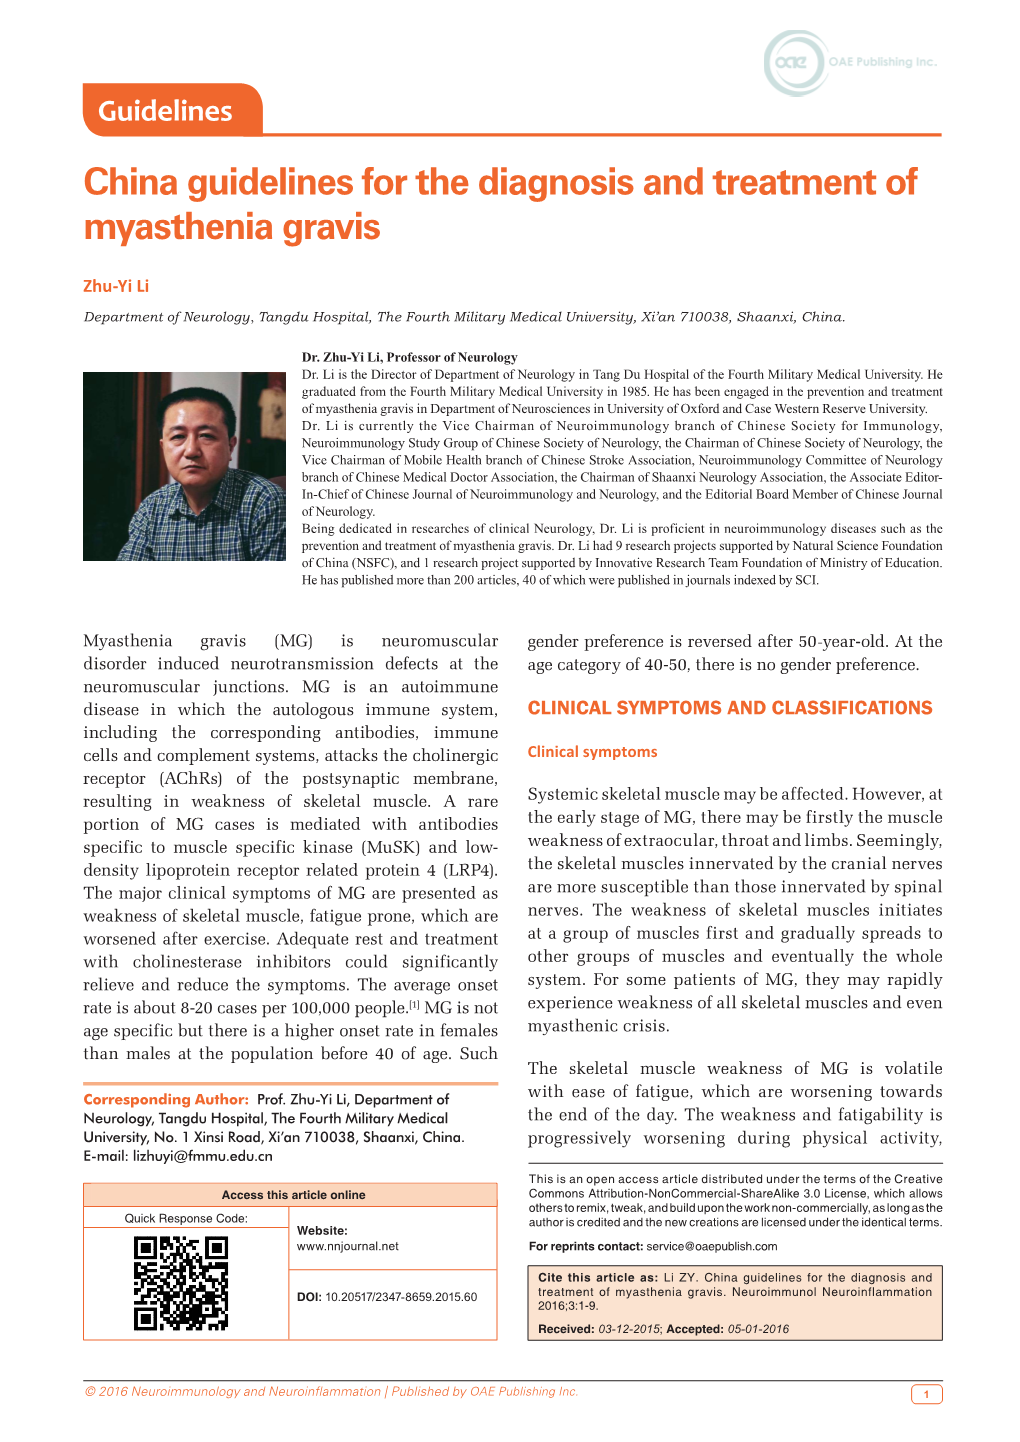 China Guidelines for the Diagnosis and Treatment of Myasthenia Gravis